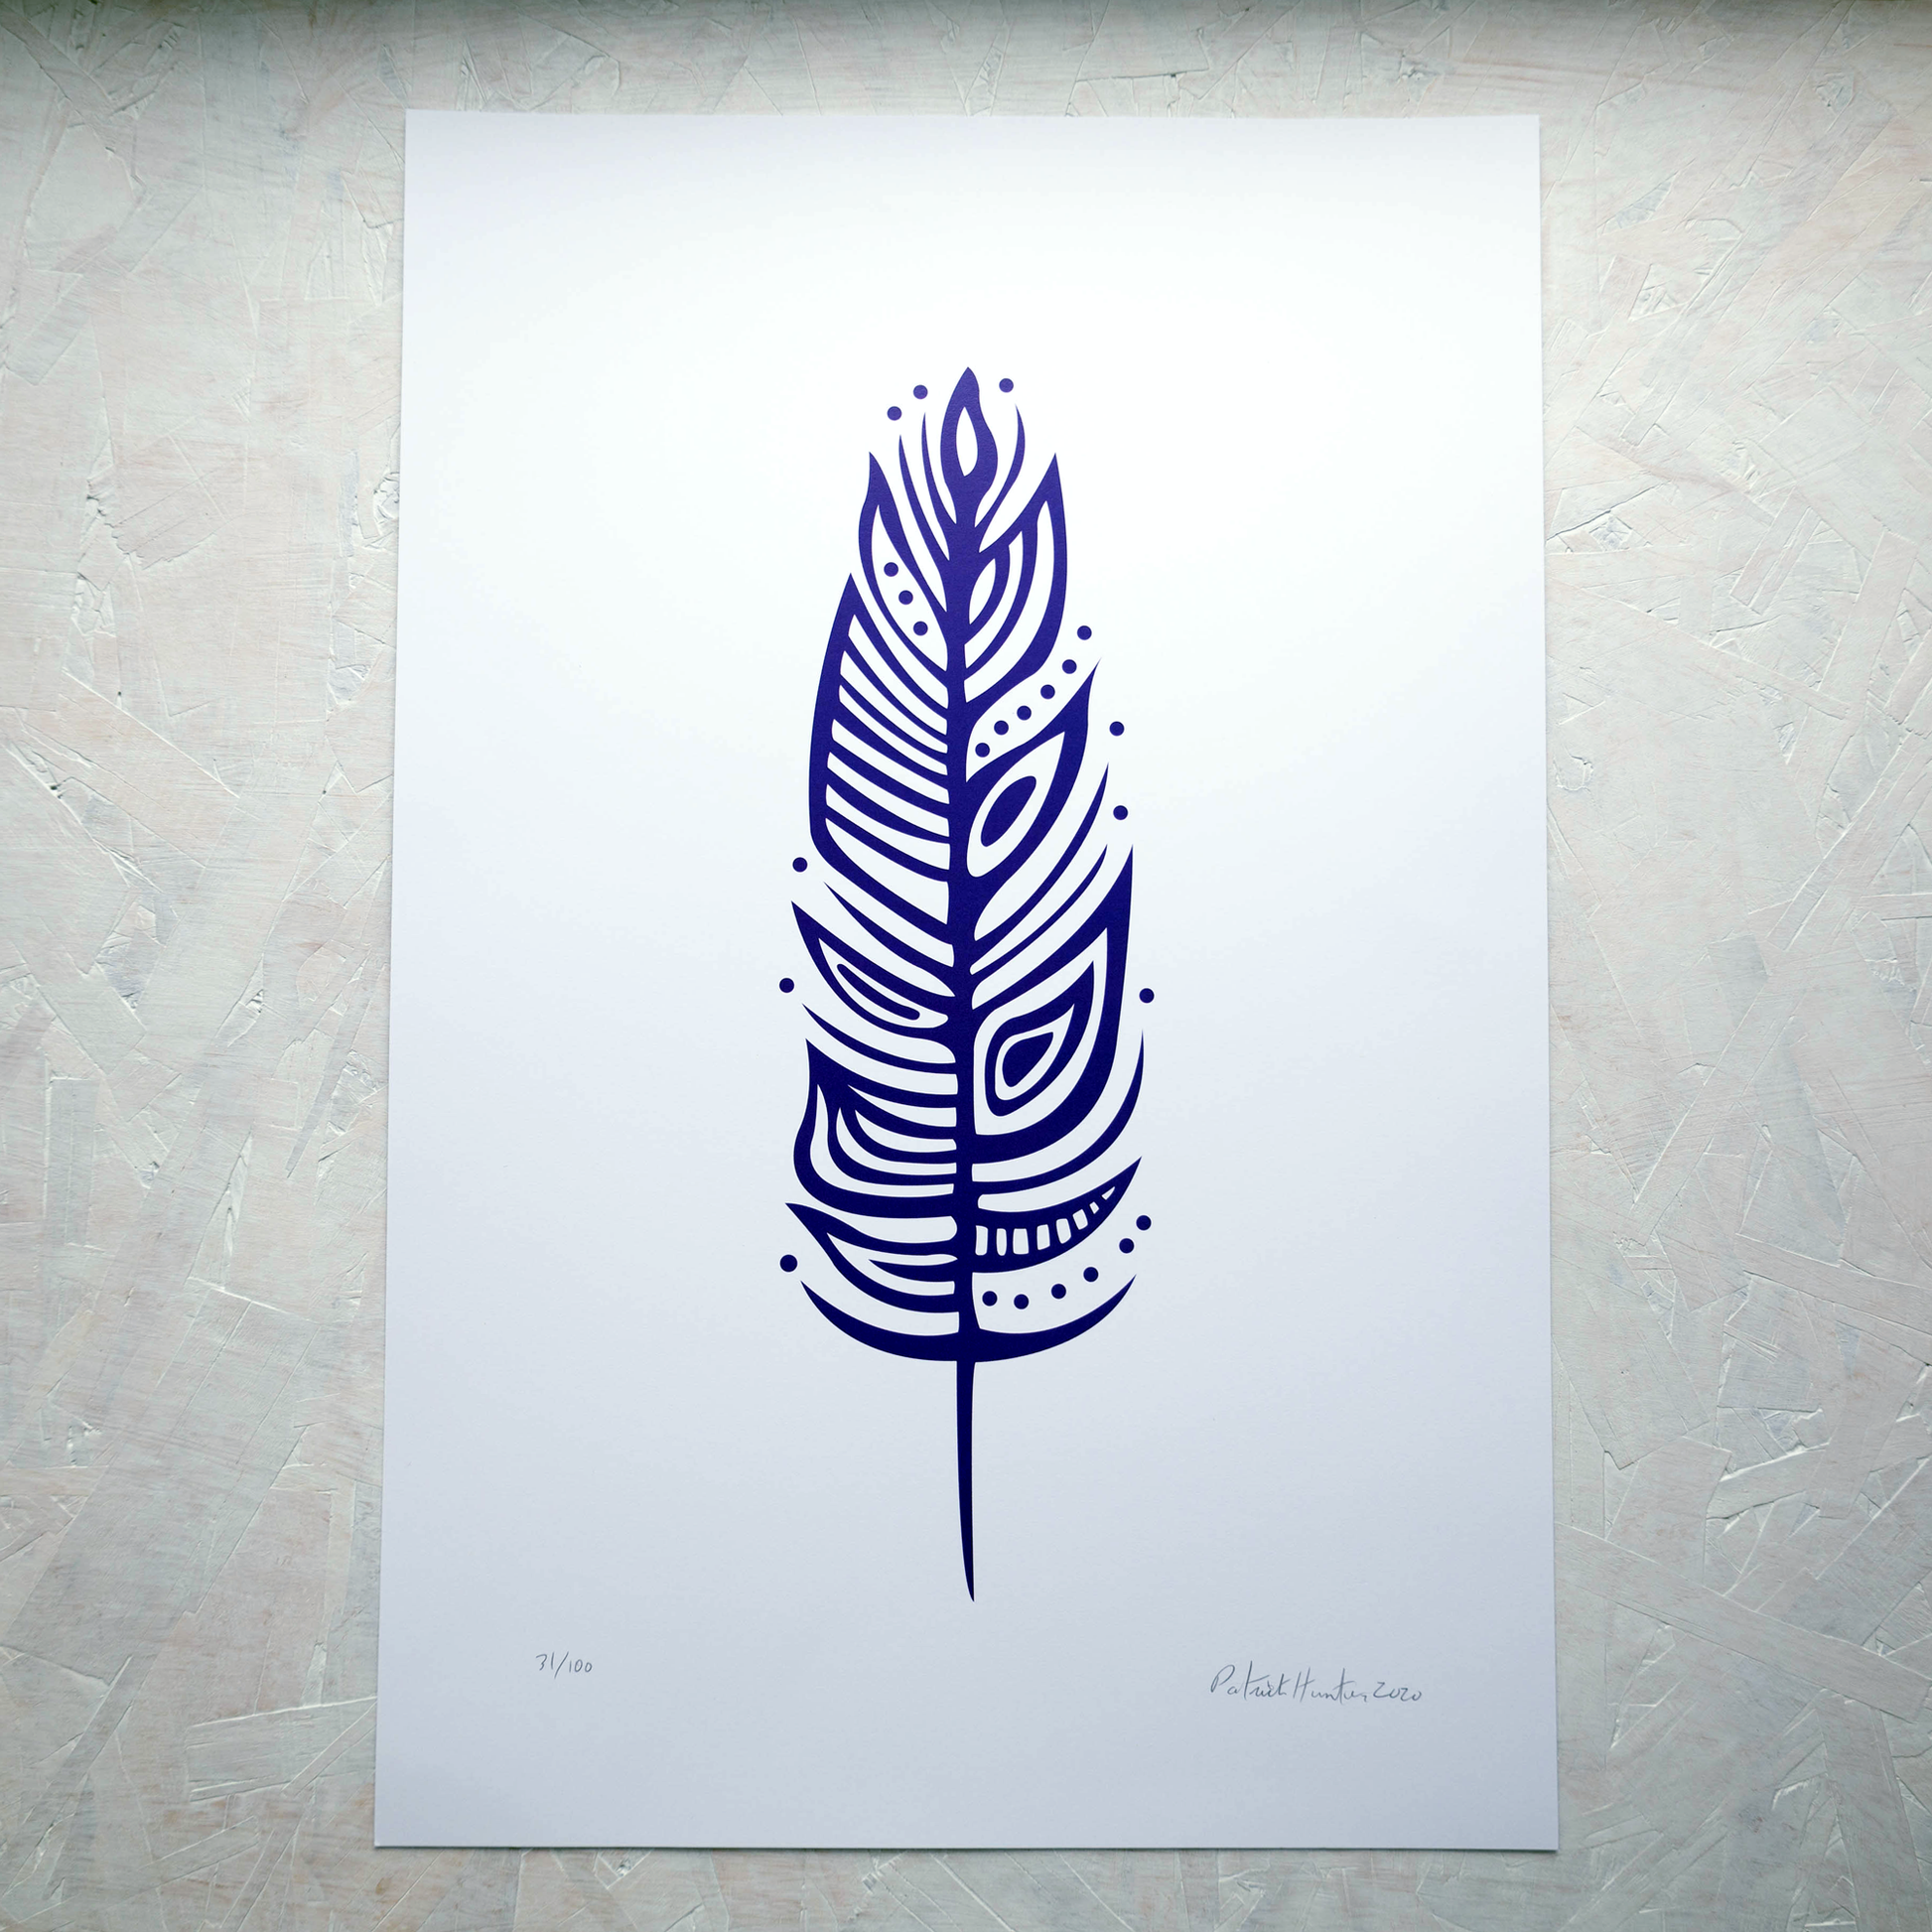 Print of Patrick Hunter's painting of an eagle feather in violet on white, woodland art style.